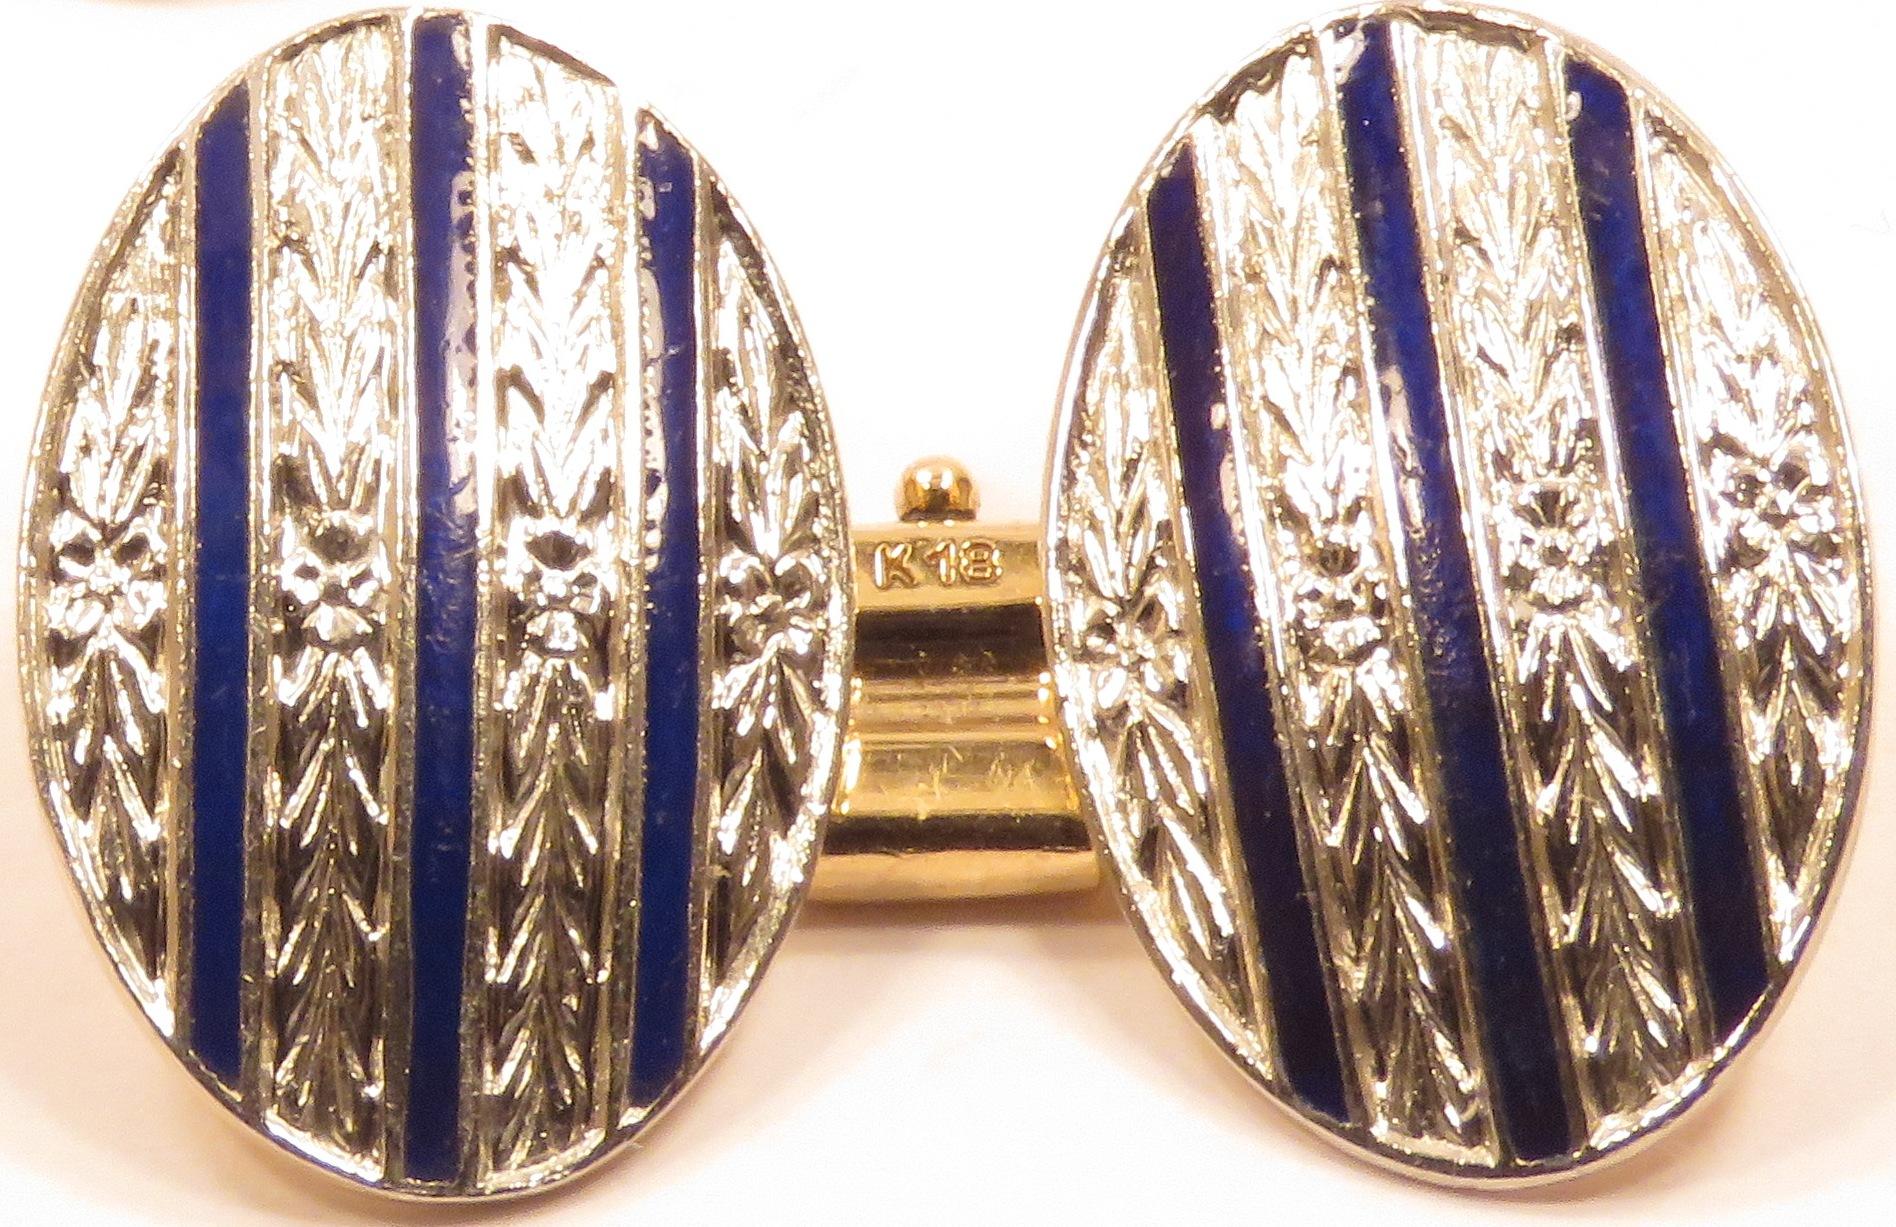  Antique Navy Enamel Engraved 18K Gold Cufflinks In Excellent Condition For Sale In Milano, IT